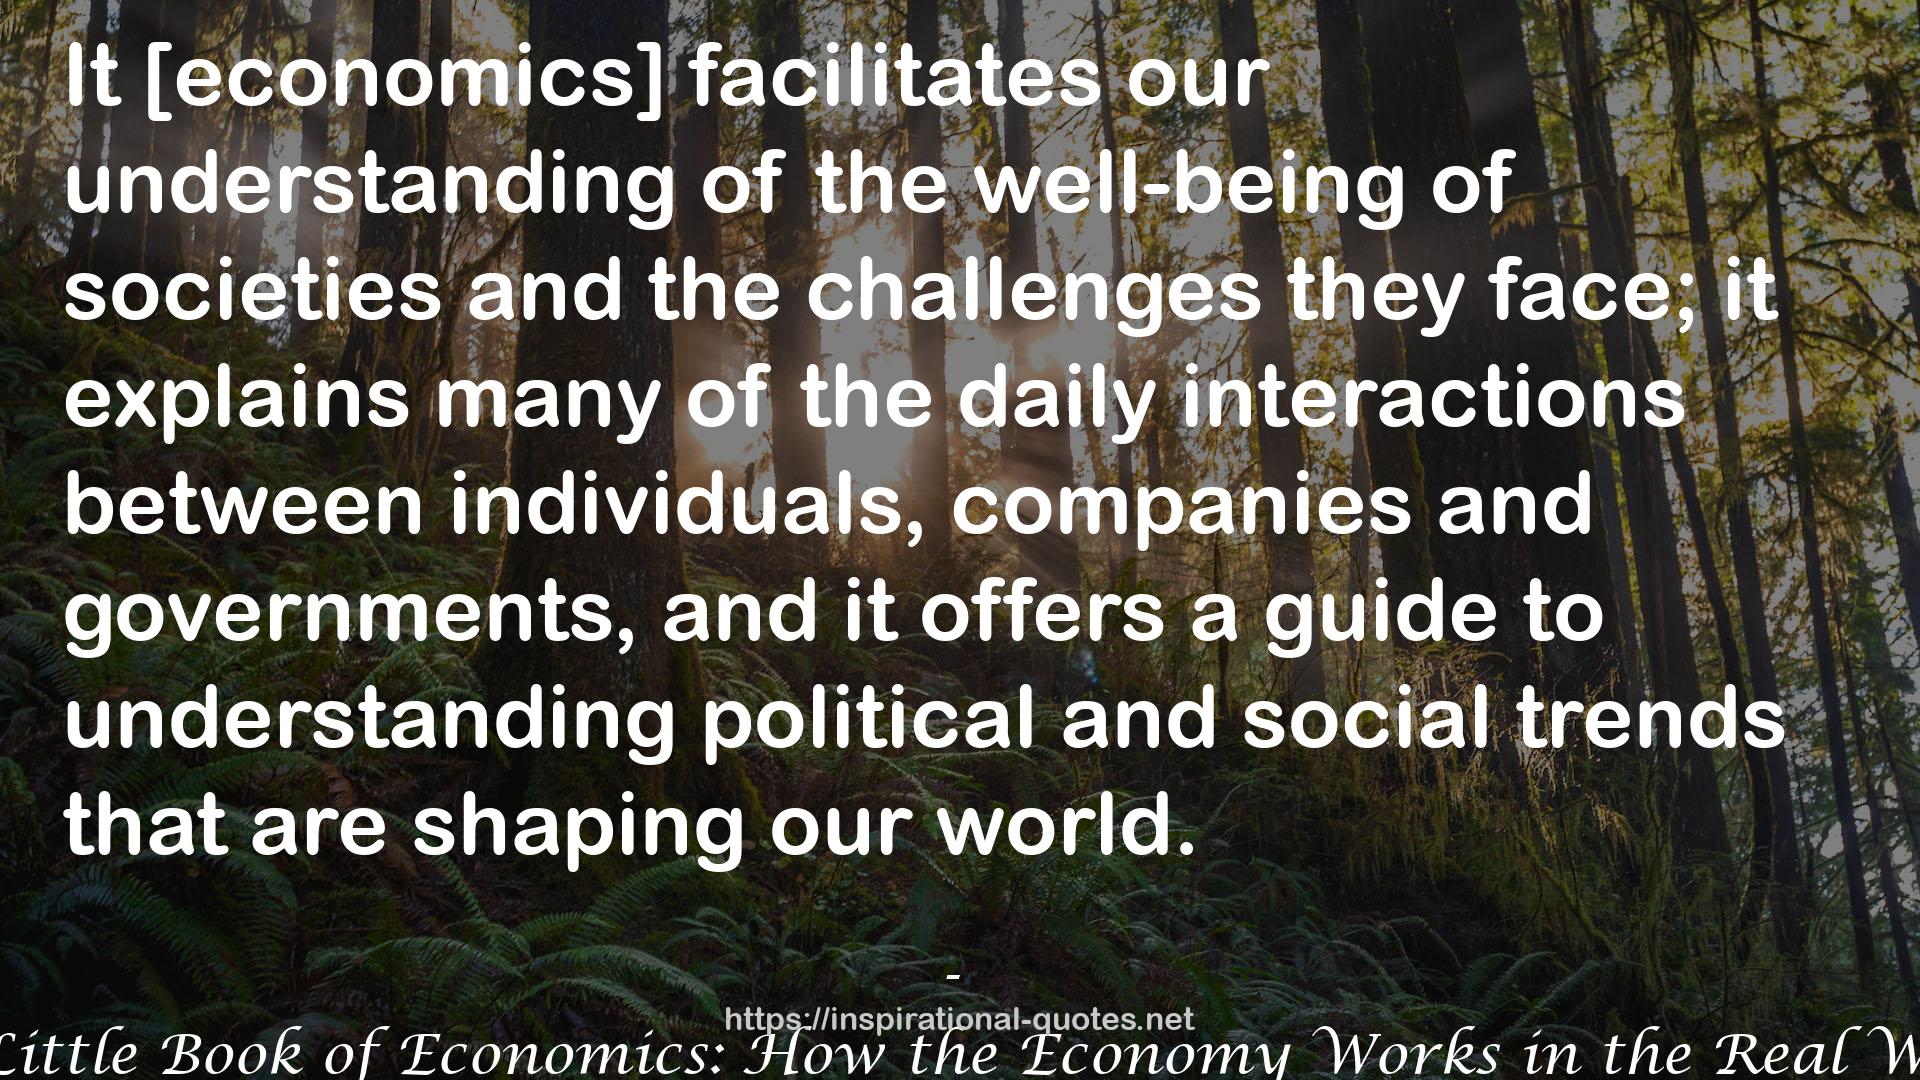 The Little Book of Economics: How the Economy Works in the Real World QUOTES